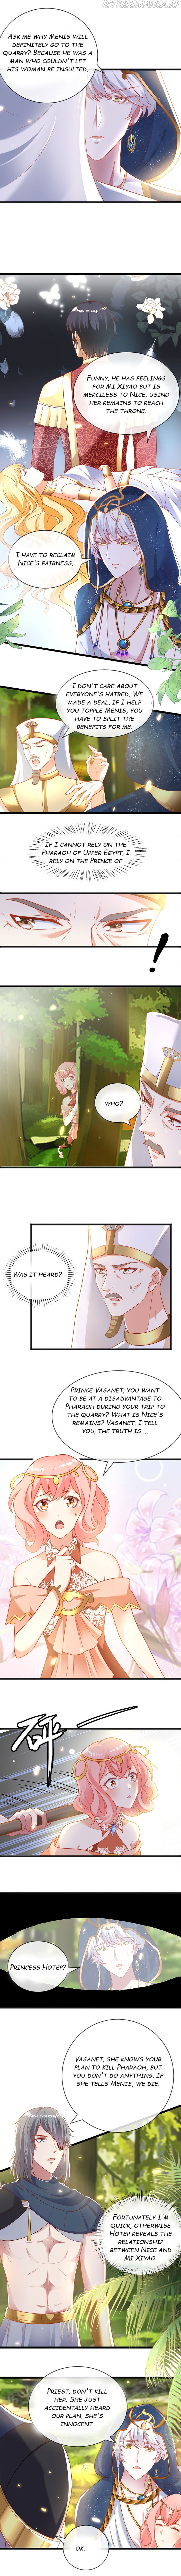 Pharaoh's First Favorite Queen - Page 1